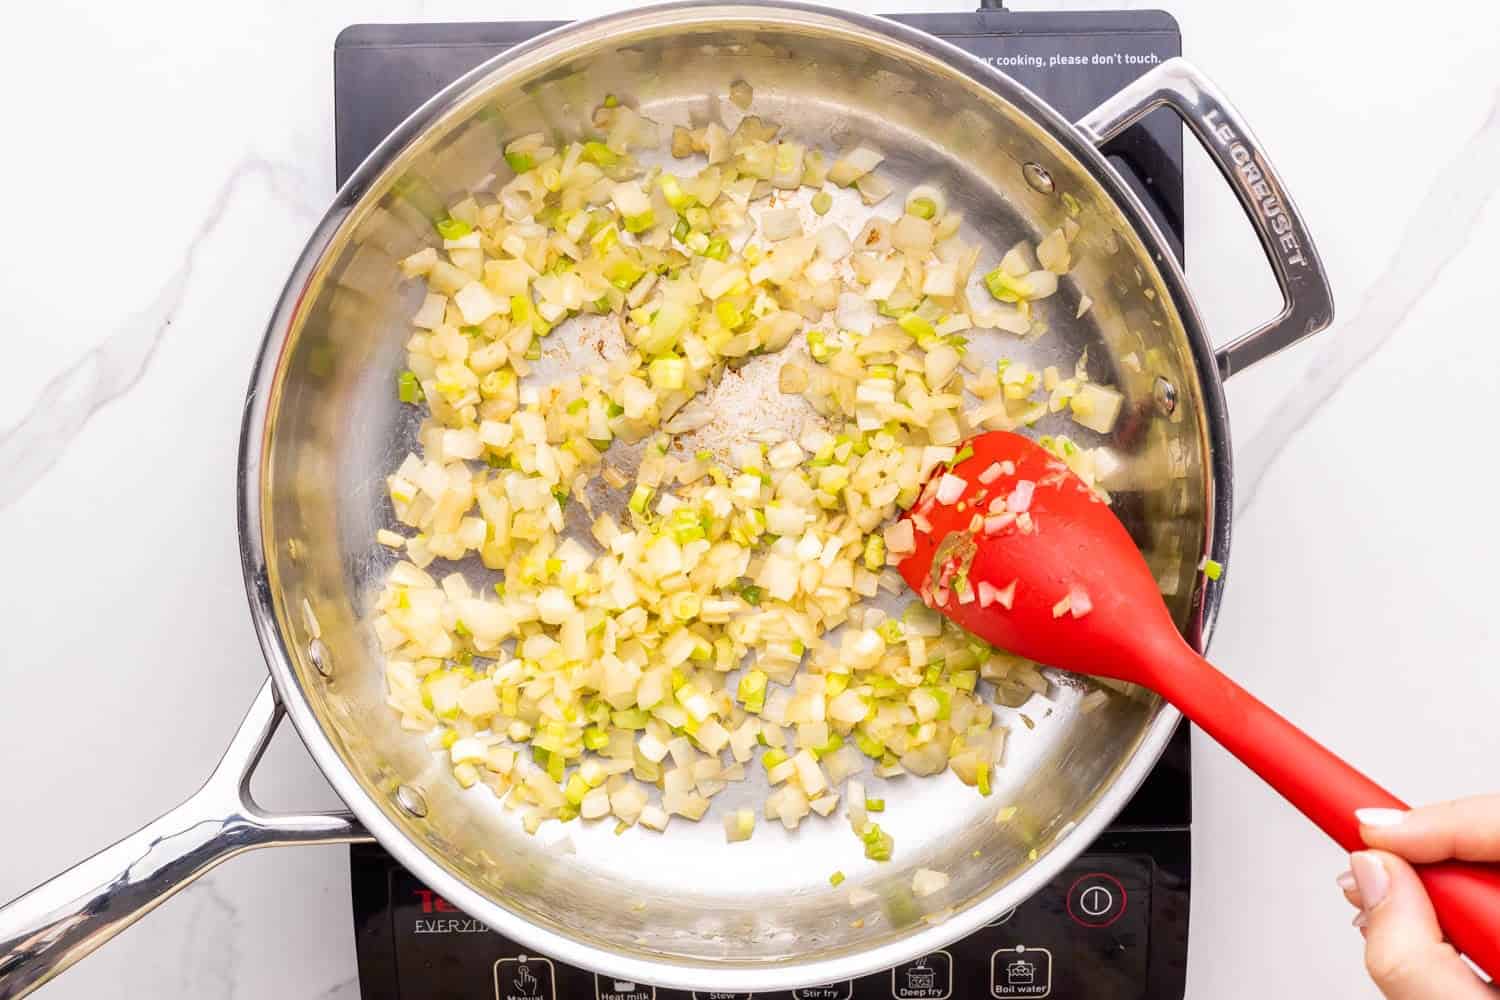 a stainless steel skillet on an electric burner. In the pan are sauteed onions, stirred with a red spoon.